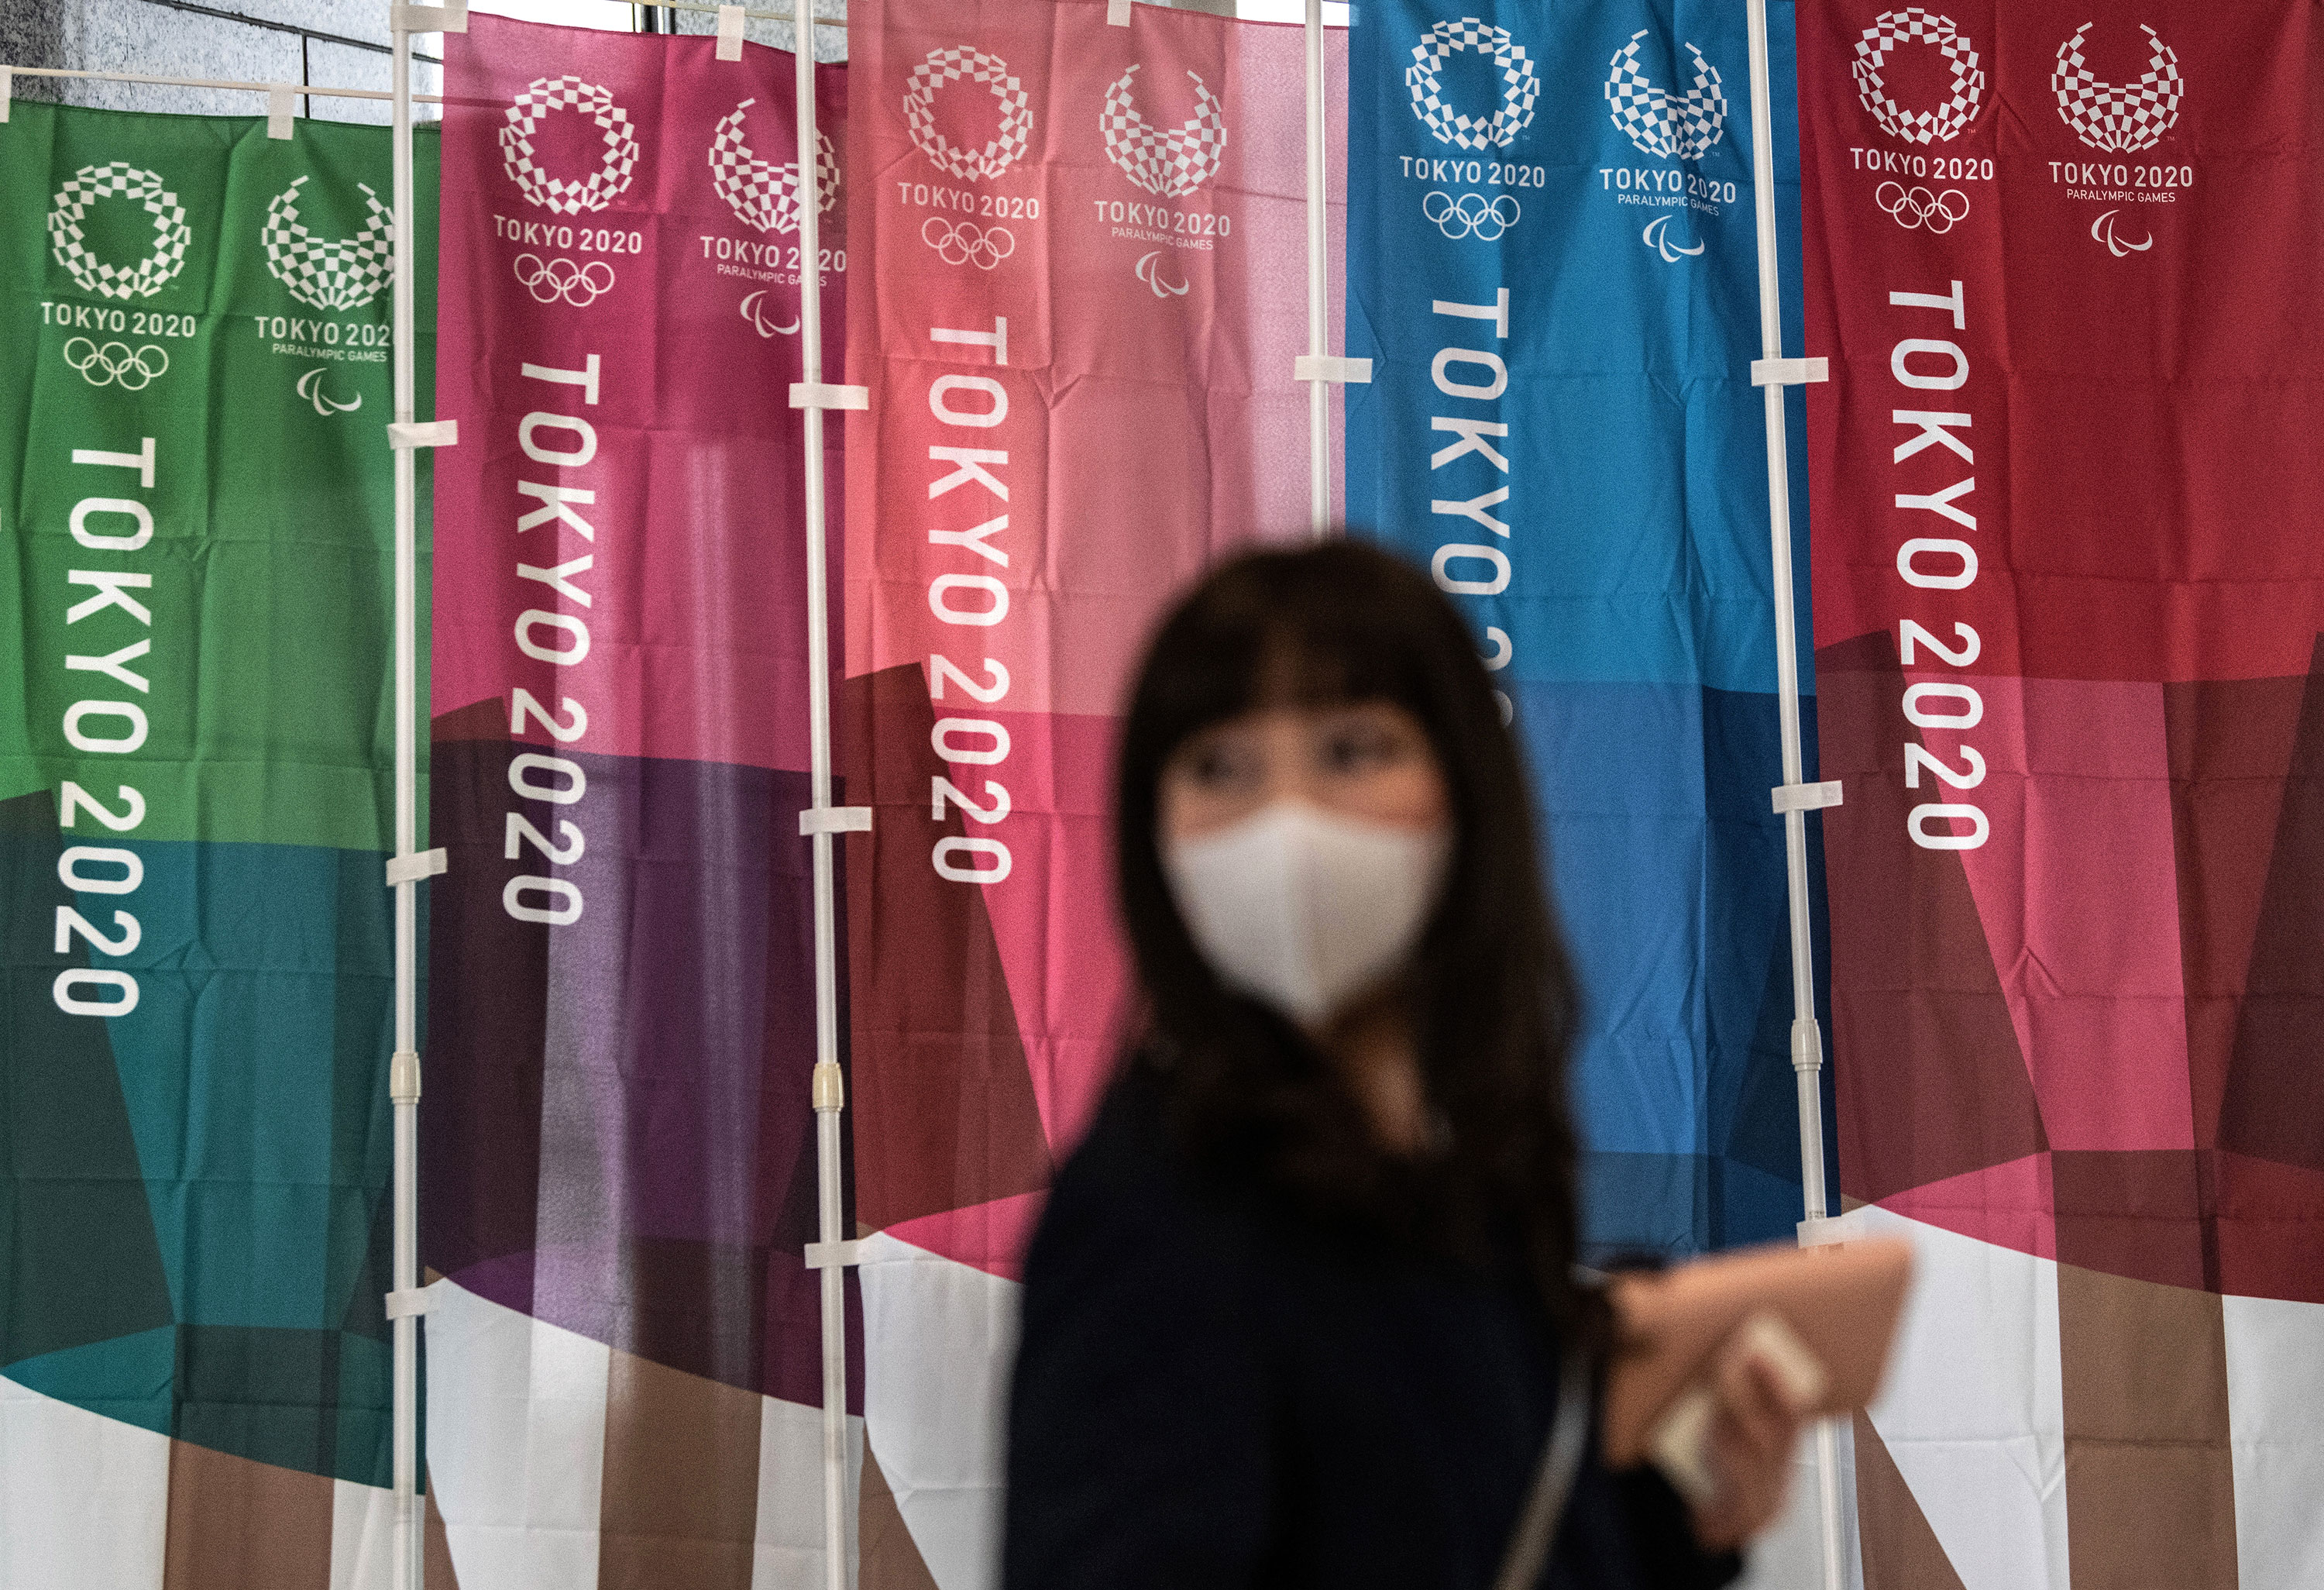 A woman walks past Tokyo 2020 Olympics banners on March 19 in Tokyo, Japan. 